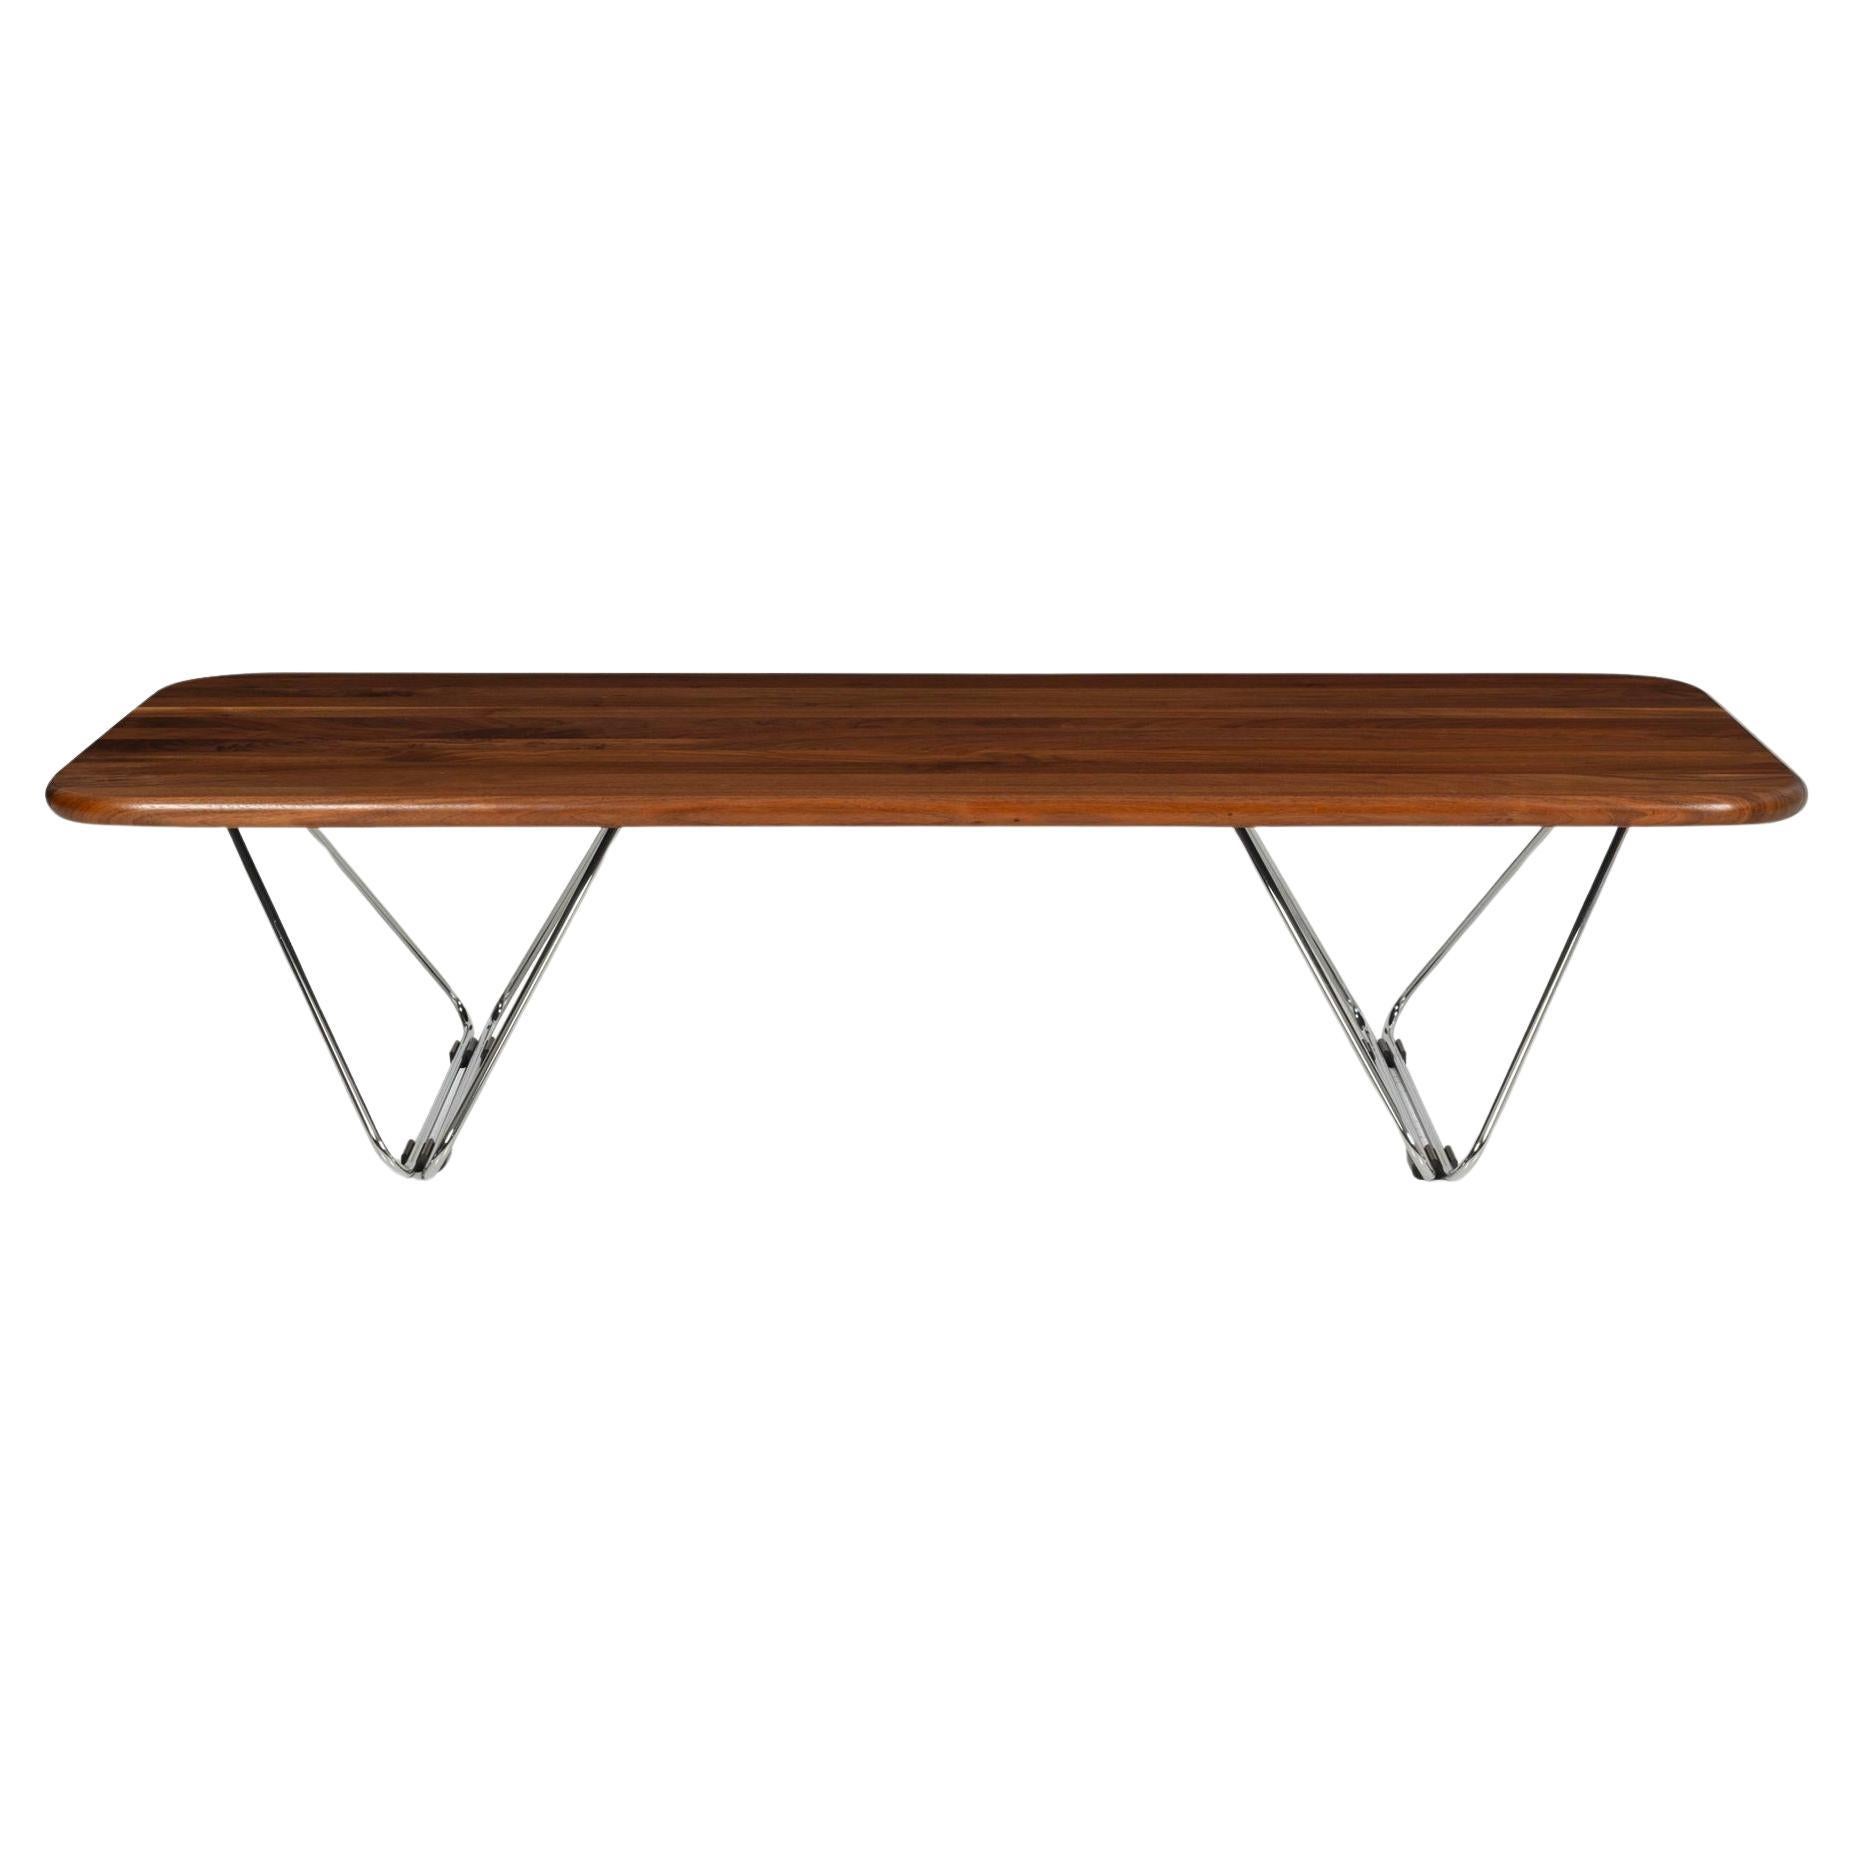 Ray Wilkes Solid Walnut Coffee Table for Herman Miller 1975 For Sale